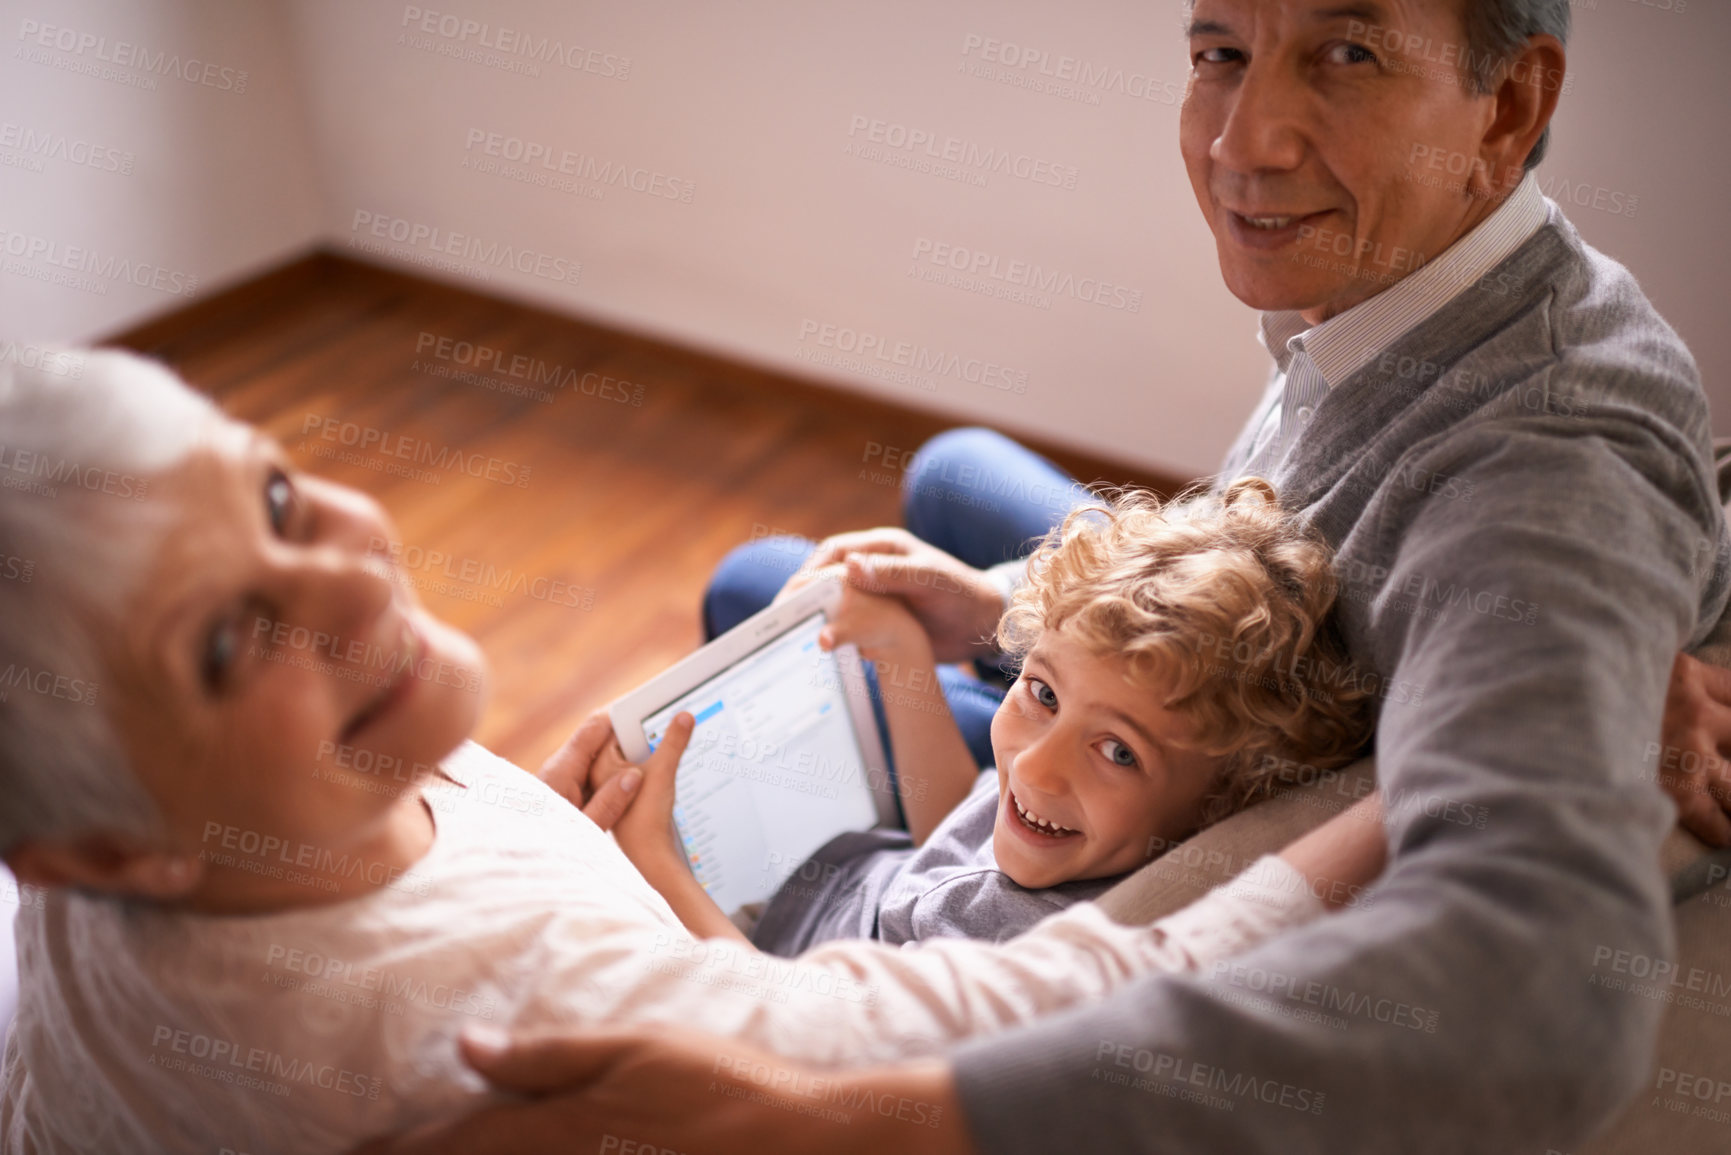 Buy stock photo Child, grandparents and tablet or portrait for online technology or communication, teaching or connection. Elderly couple, retirement and kid with internet learning in apartment, together or bonding